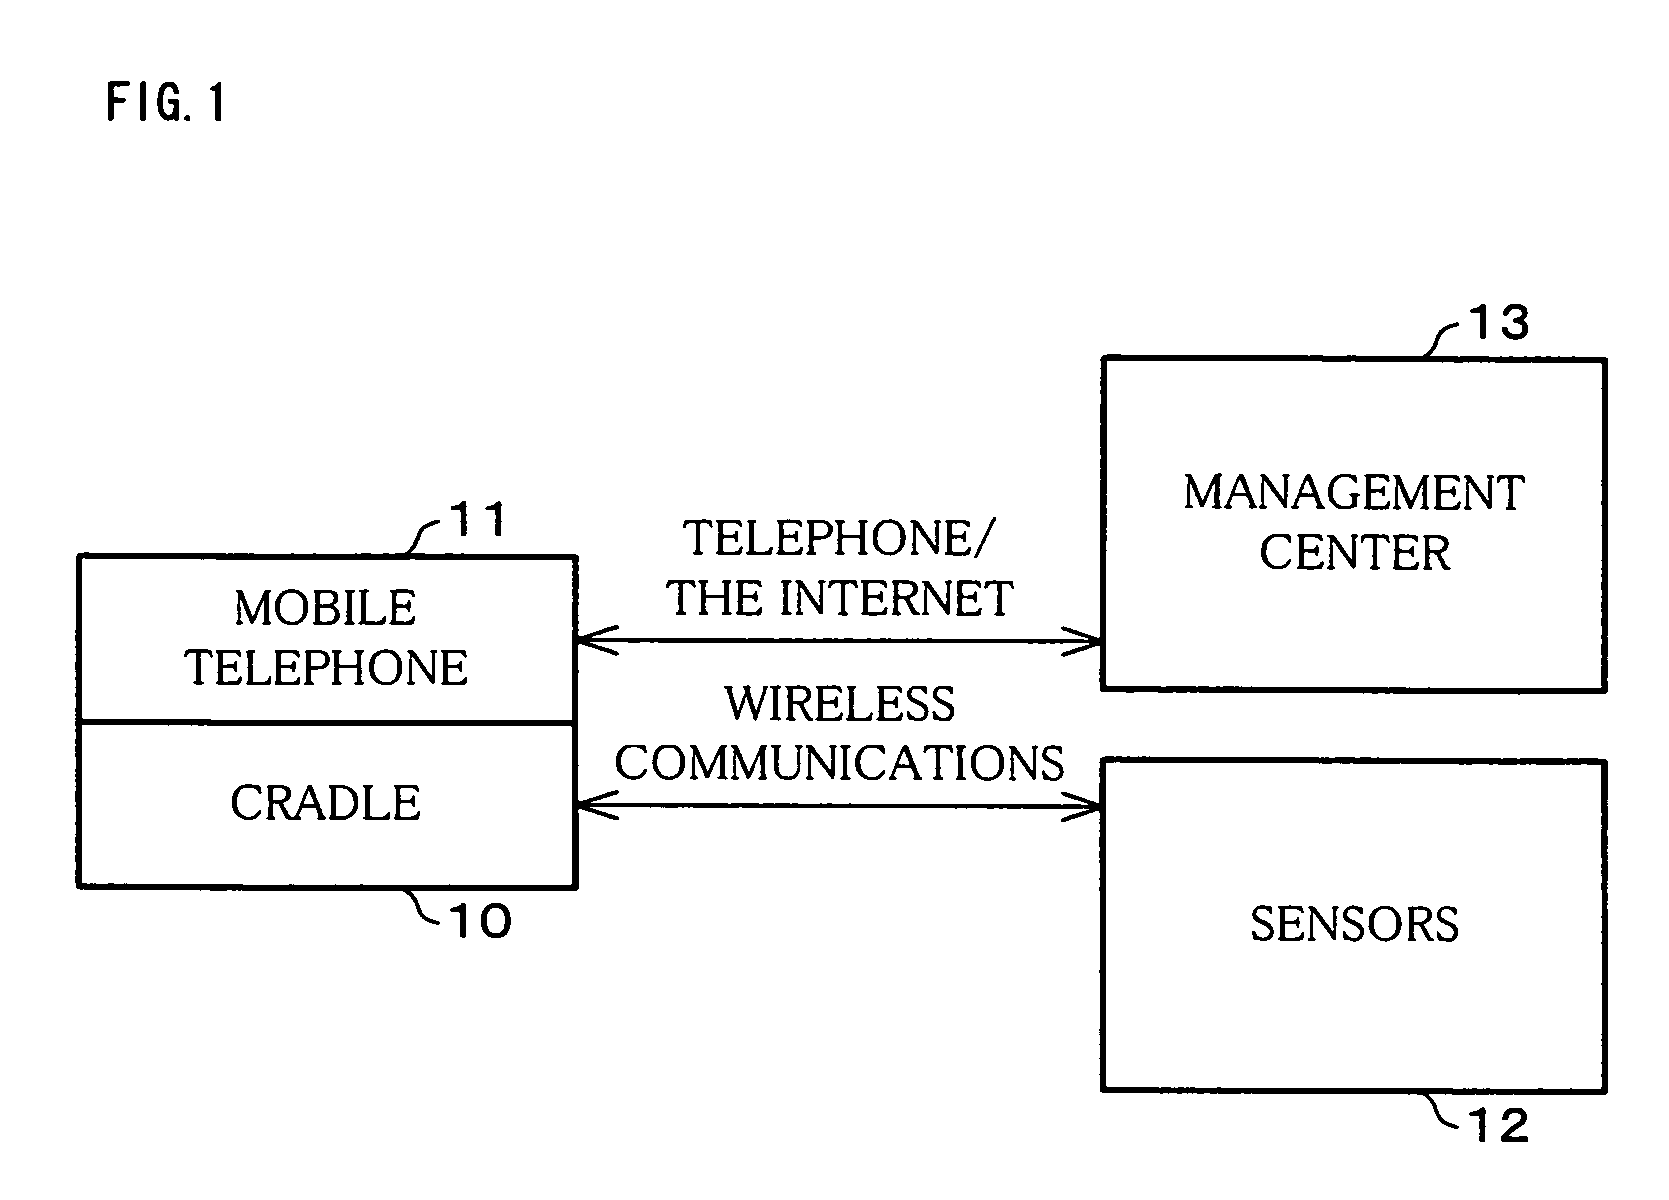 Cradle, security system, telephone, and monitoring method